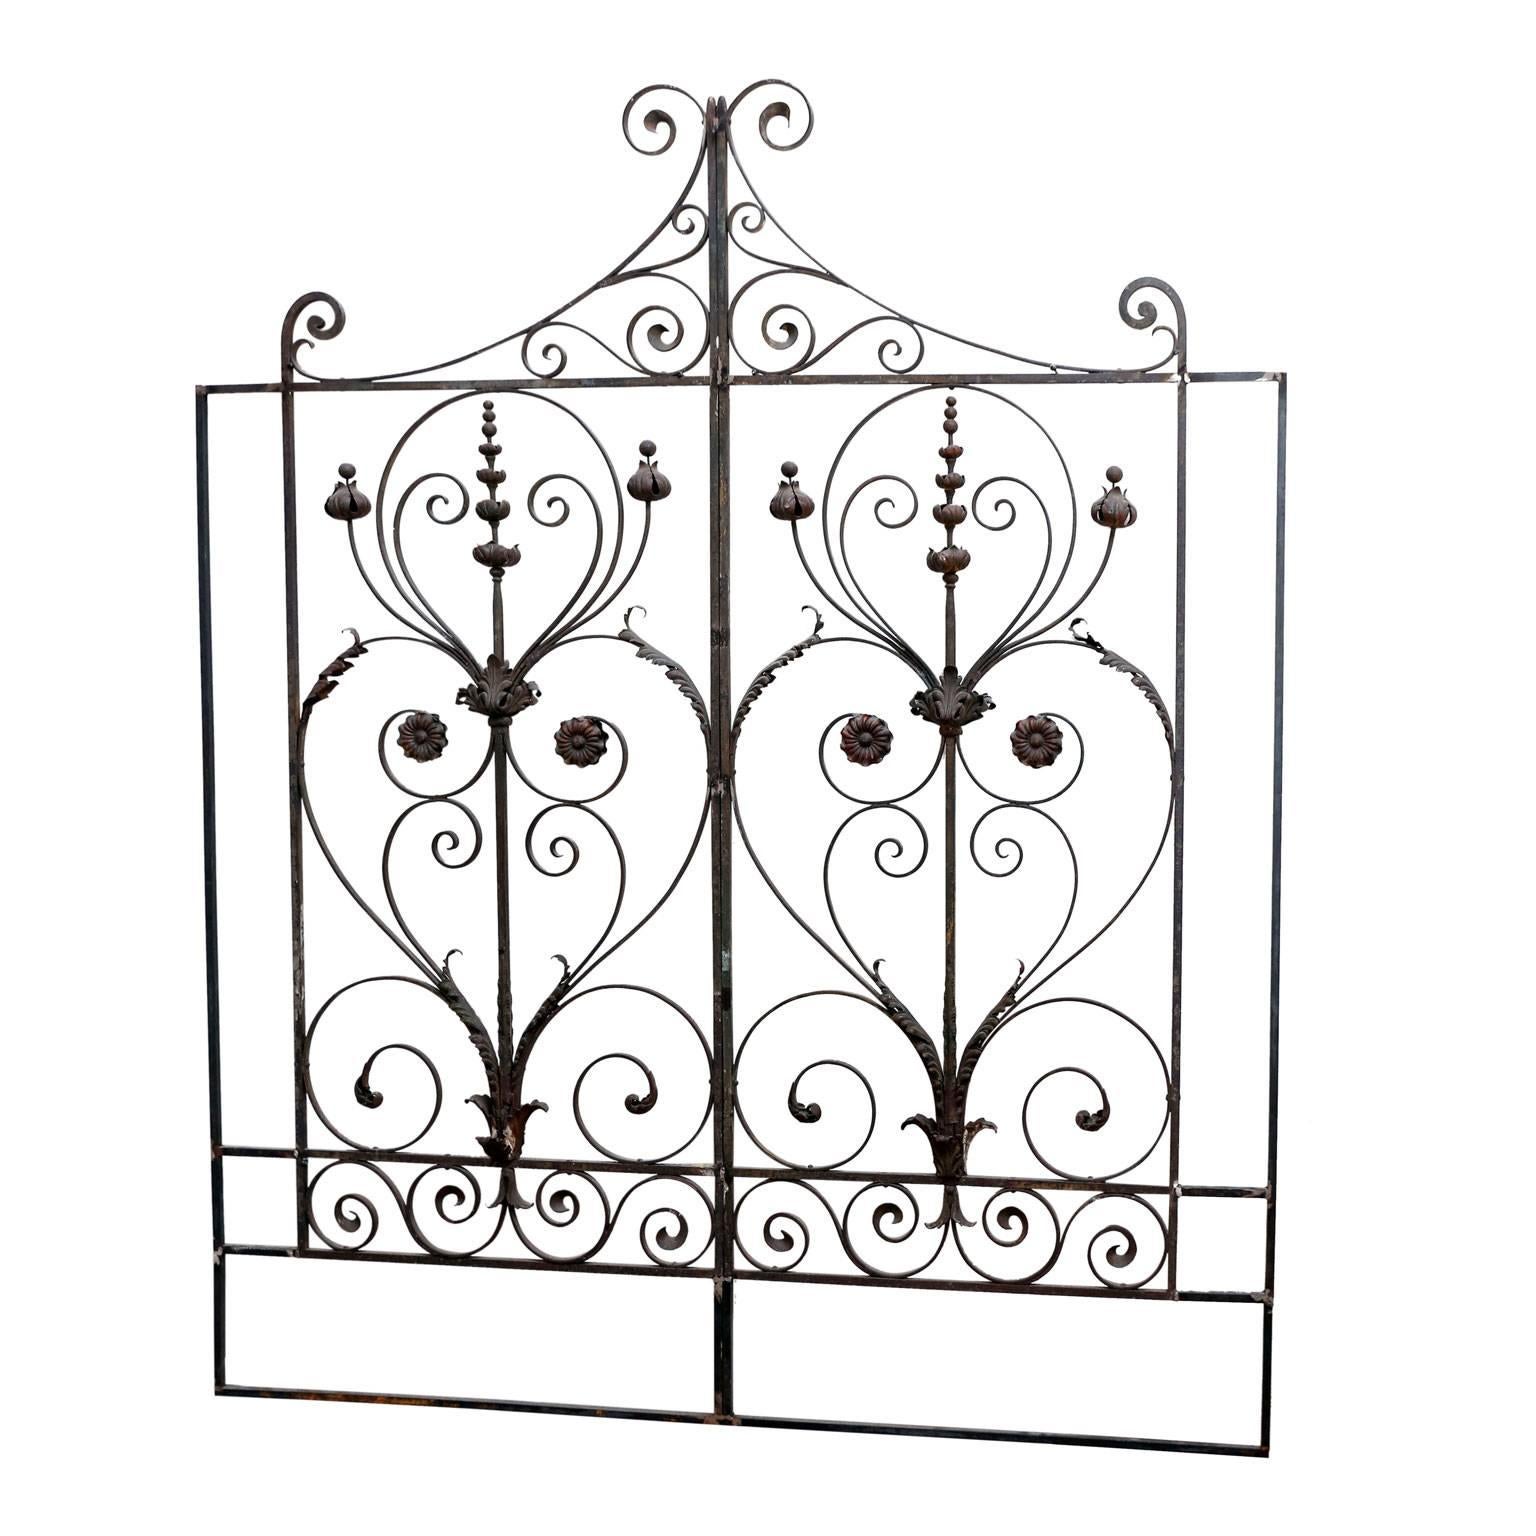 Pair of 19th Century French Forged Iron Gates, later adapted as a Headboard